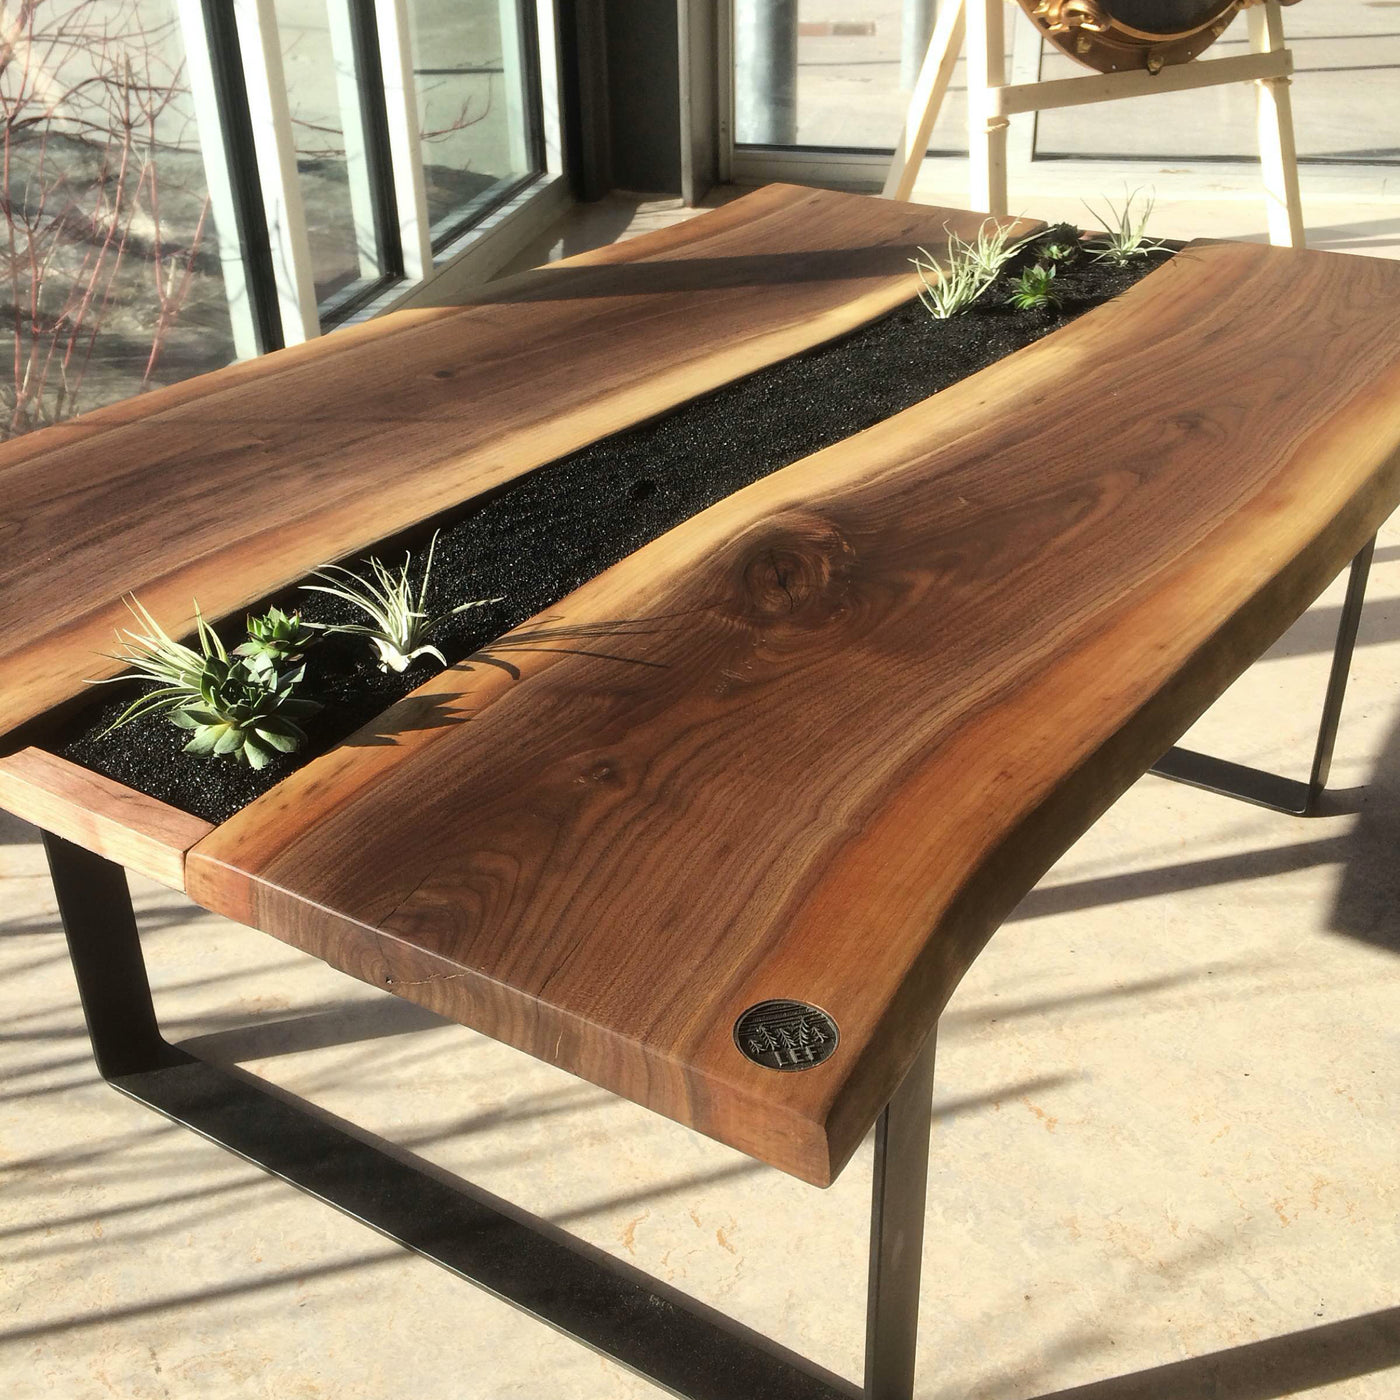 Muskoka Live Series Table - Live Edge Forest-Woodworking-Eclipse Art Gallery